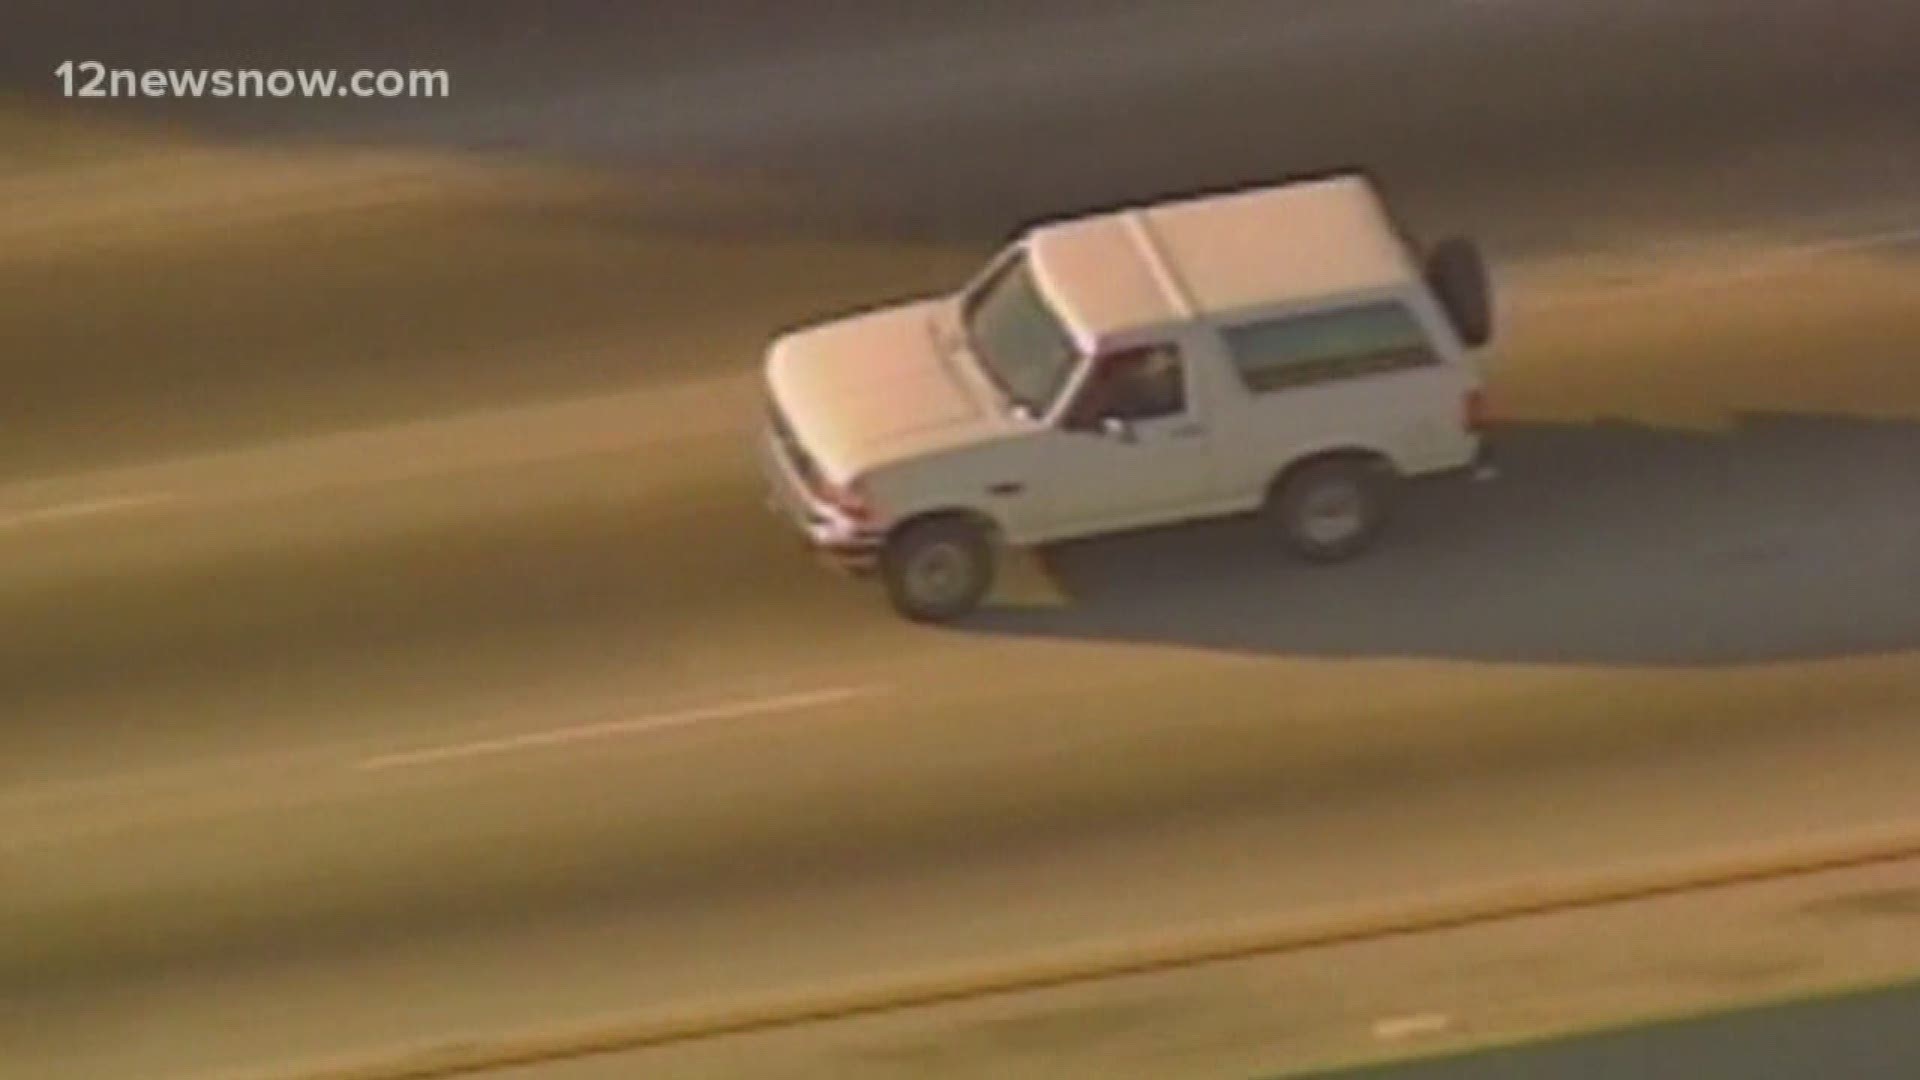 Twenty-five years ago today, everyone's eyes were fixed on a white Ford Bronco, with O.J. Simpson riding as the passenger. He was a person of interest in the murders of his wife Nicole and her friend Ron Goldman. Simpson's friend Al Cowlings was behind the wheel as they led police on a slow chase through Los Angeles. Coverage of the chase interrupted the 1994 NBA finals that was being watched by about 94 million people.